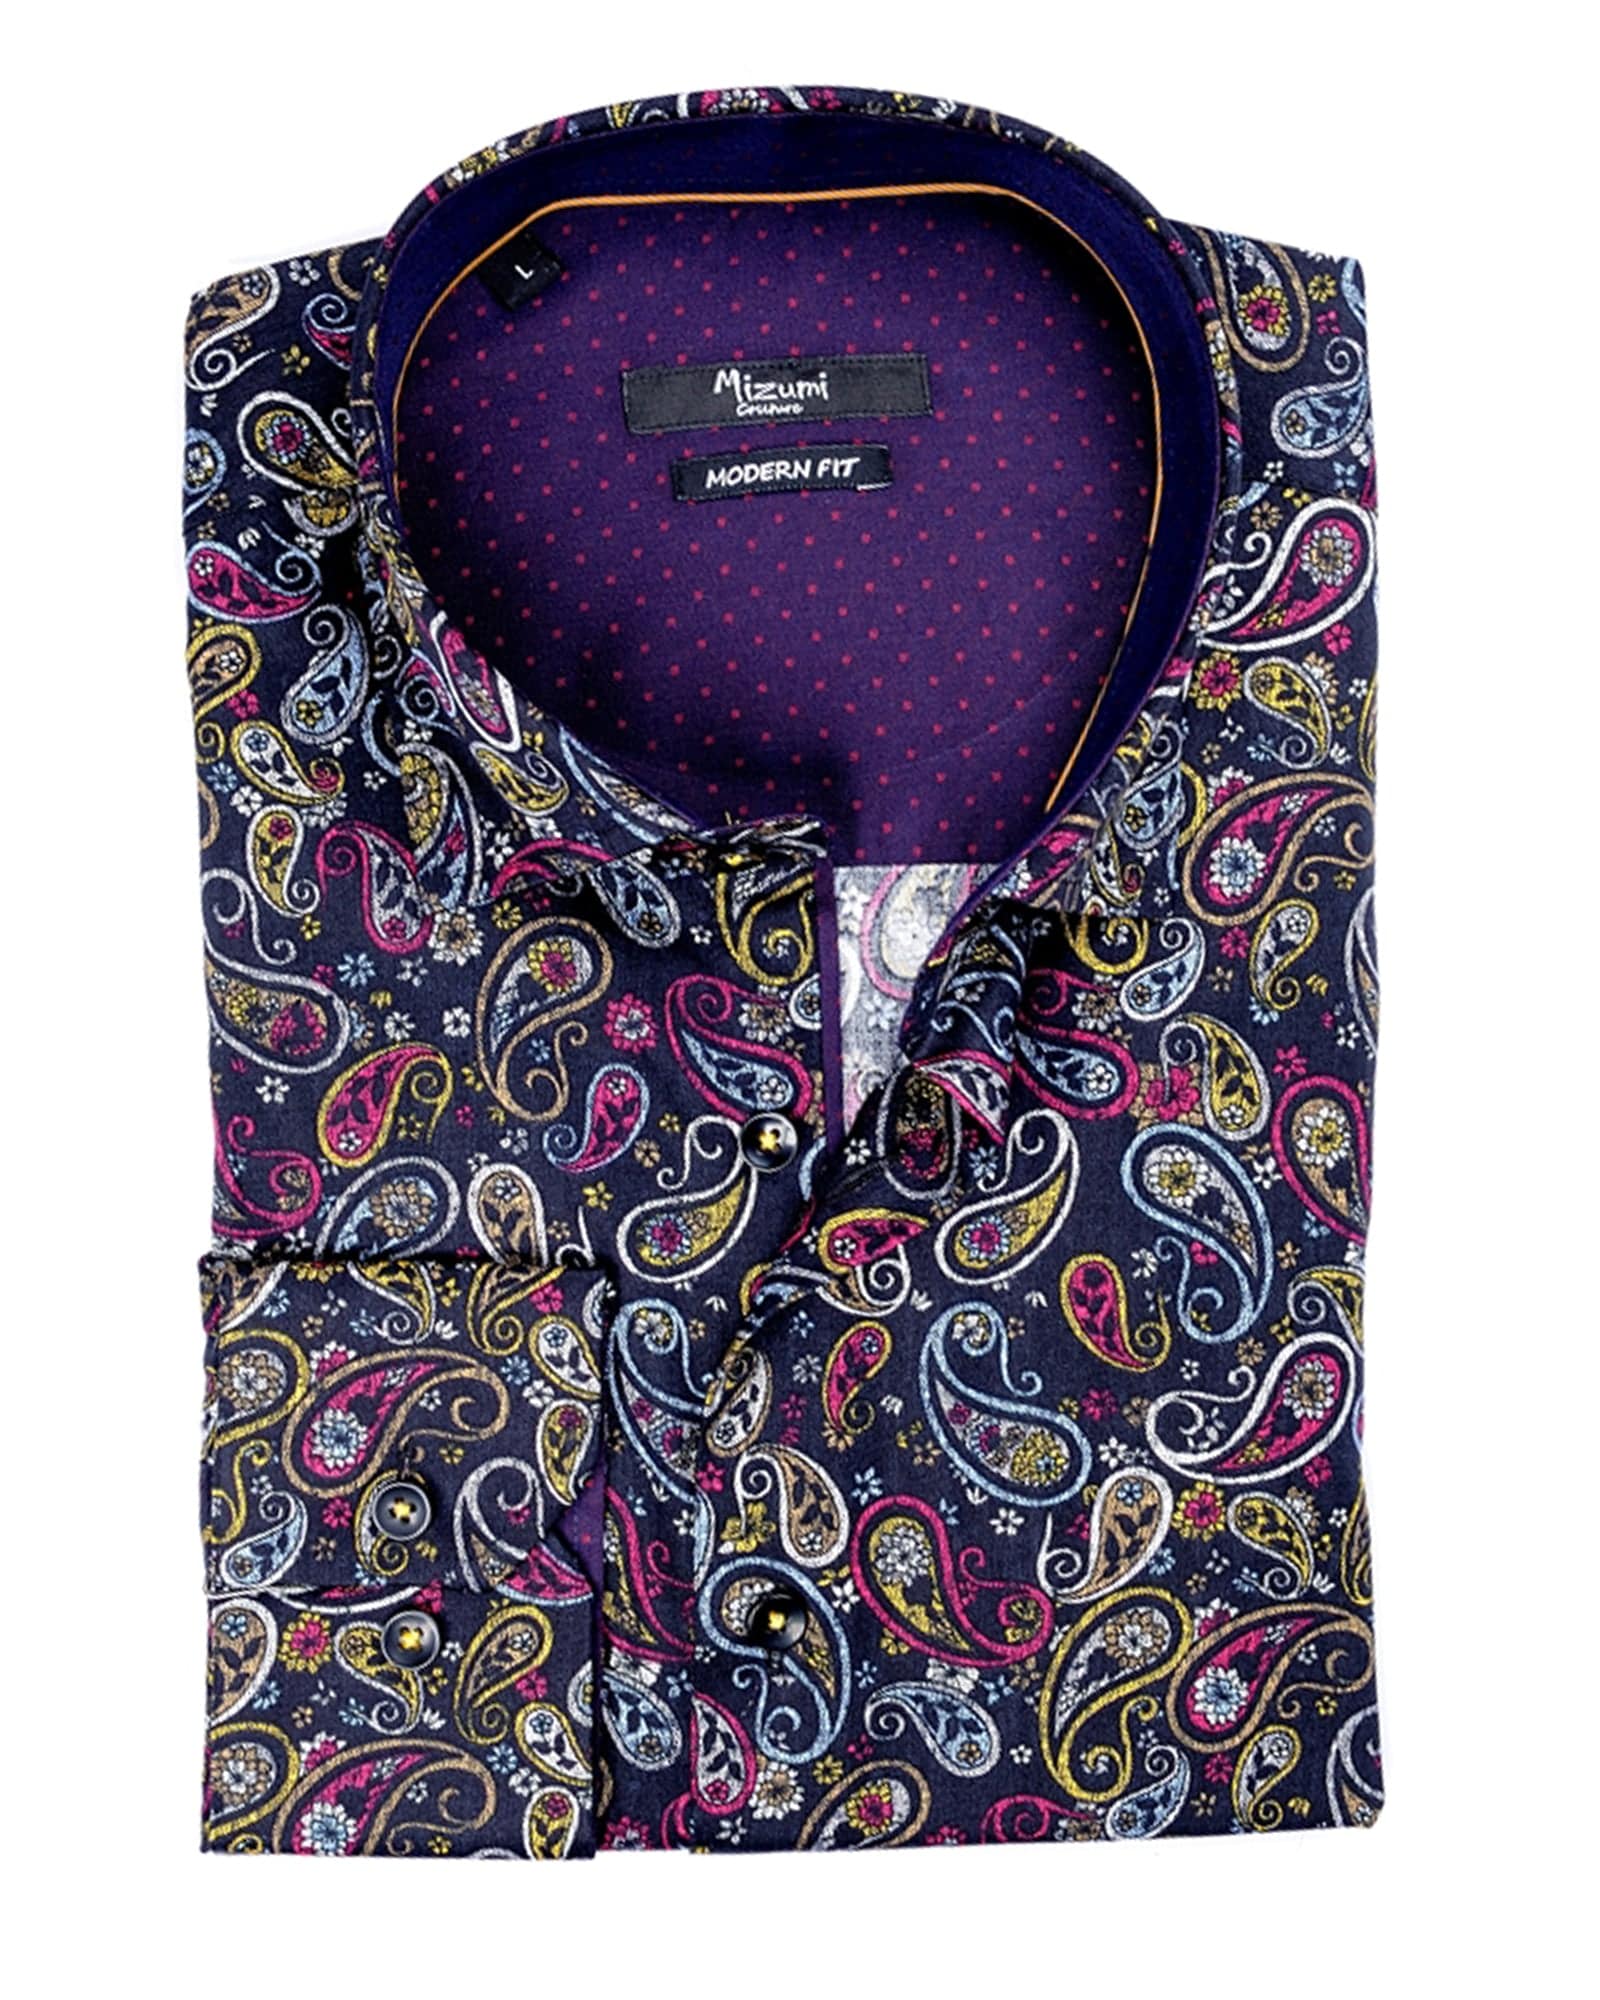 Black With Multi-Colored Paisley Sport Shirt - Rainwater's Men's Clothing and Tuxedo Rental